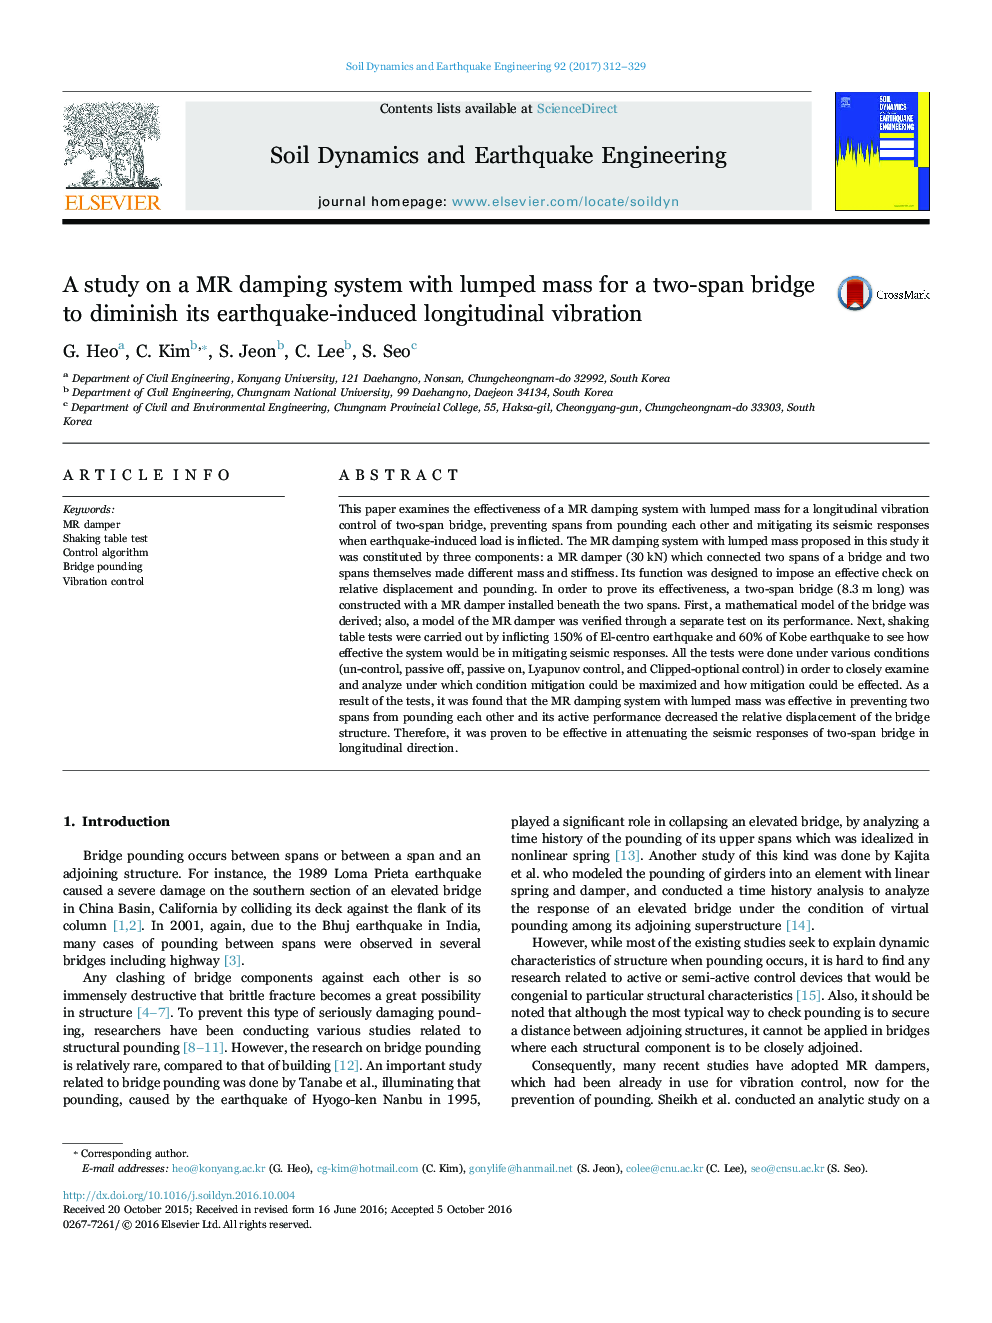 A study on a MR damping system with lumped mass for a two-span bridge to diminish its earthquake-induced longitudinal vibration